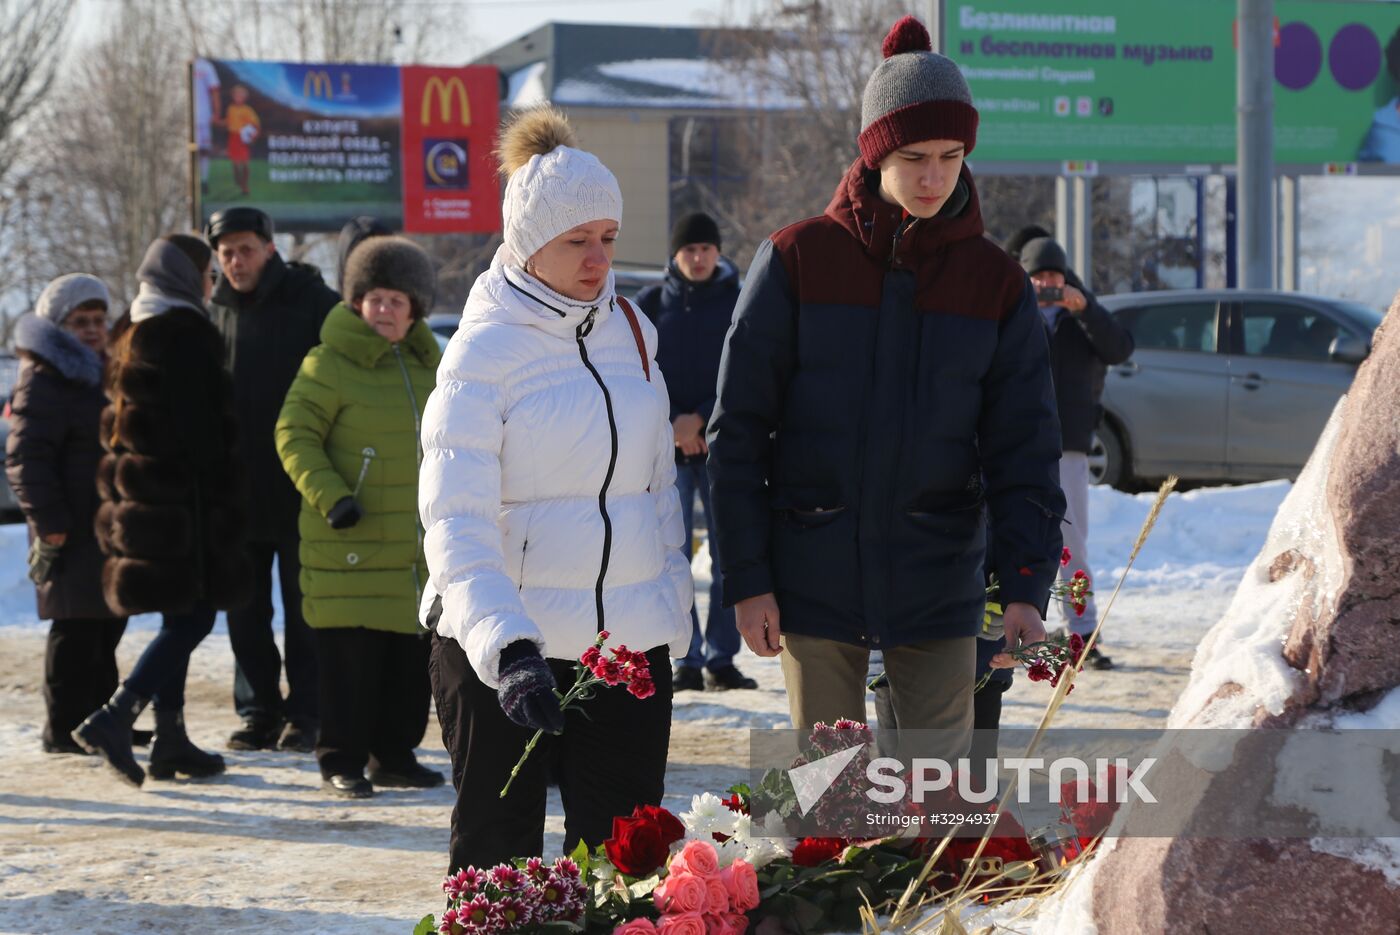 Residents commemorate victims of An-148 plane crash